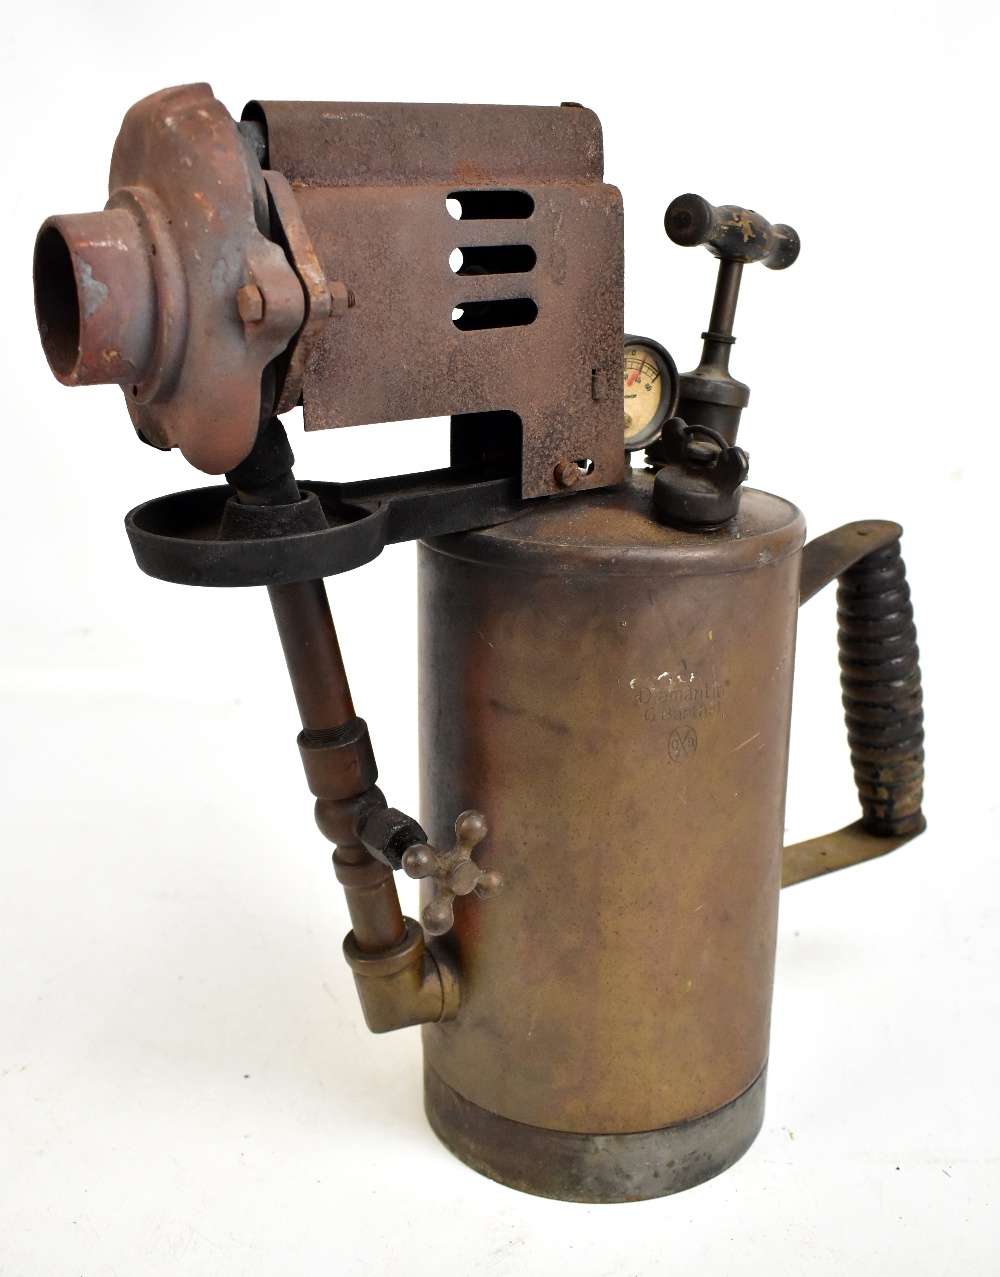 A copper bodied boiler maker's blow lamp, stamped 'Diamantin G. Barthel', with manometer dial,